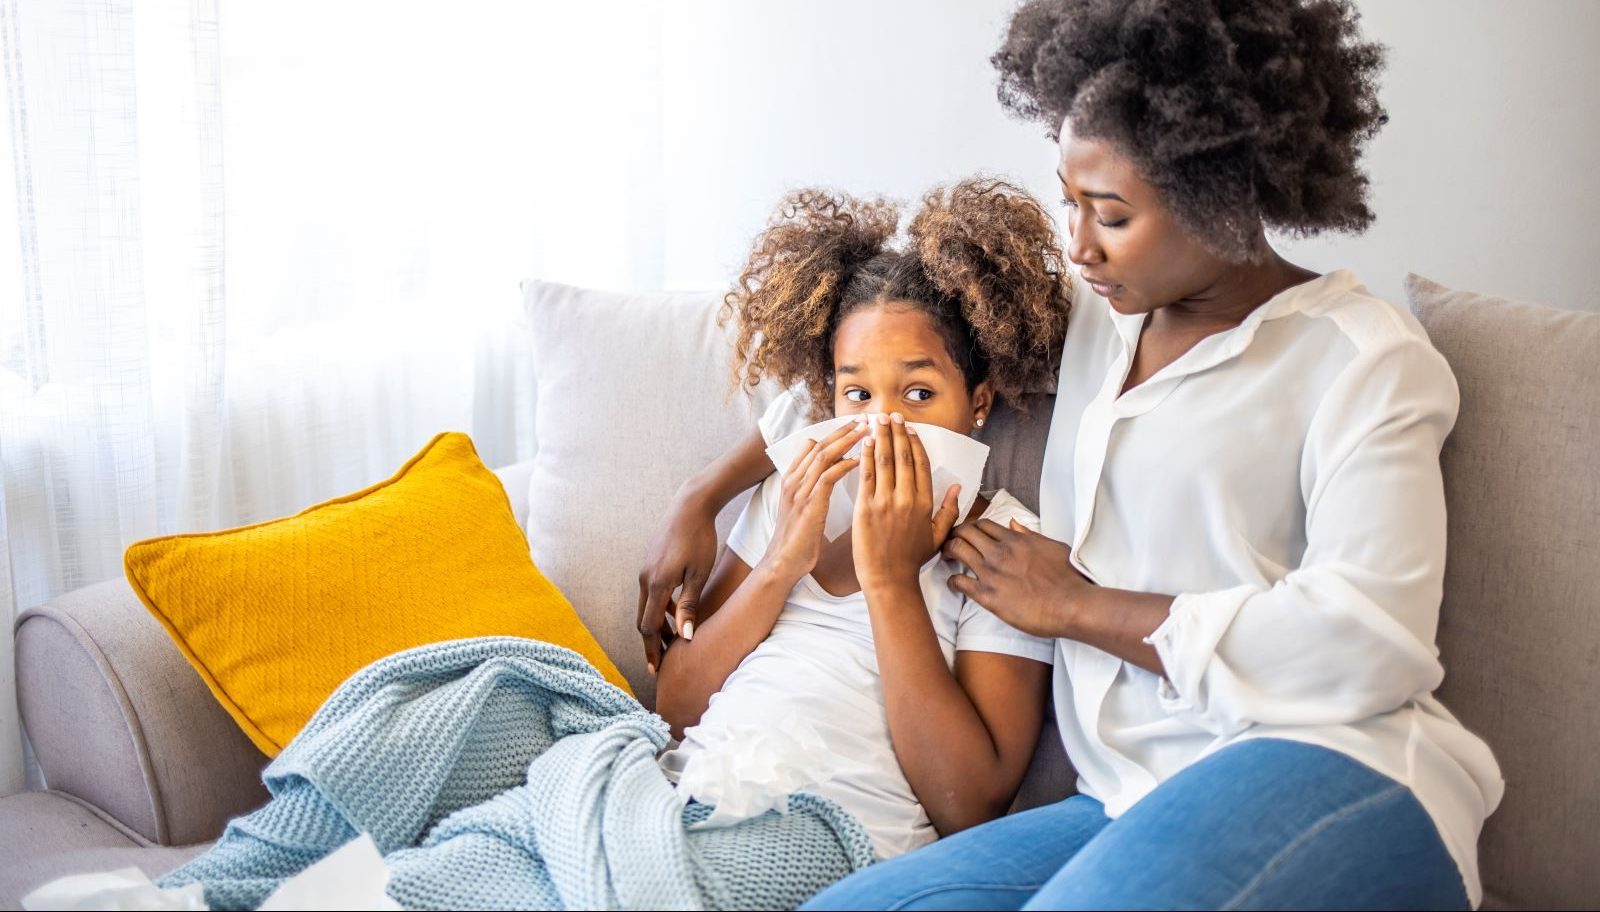 Respiratory syncytial virus (RSV) has hit more than 30 states, and causes a runny or stuffy nose, cough or sore throat - often in kids.